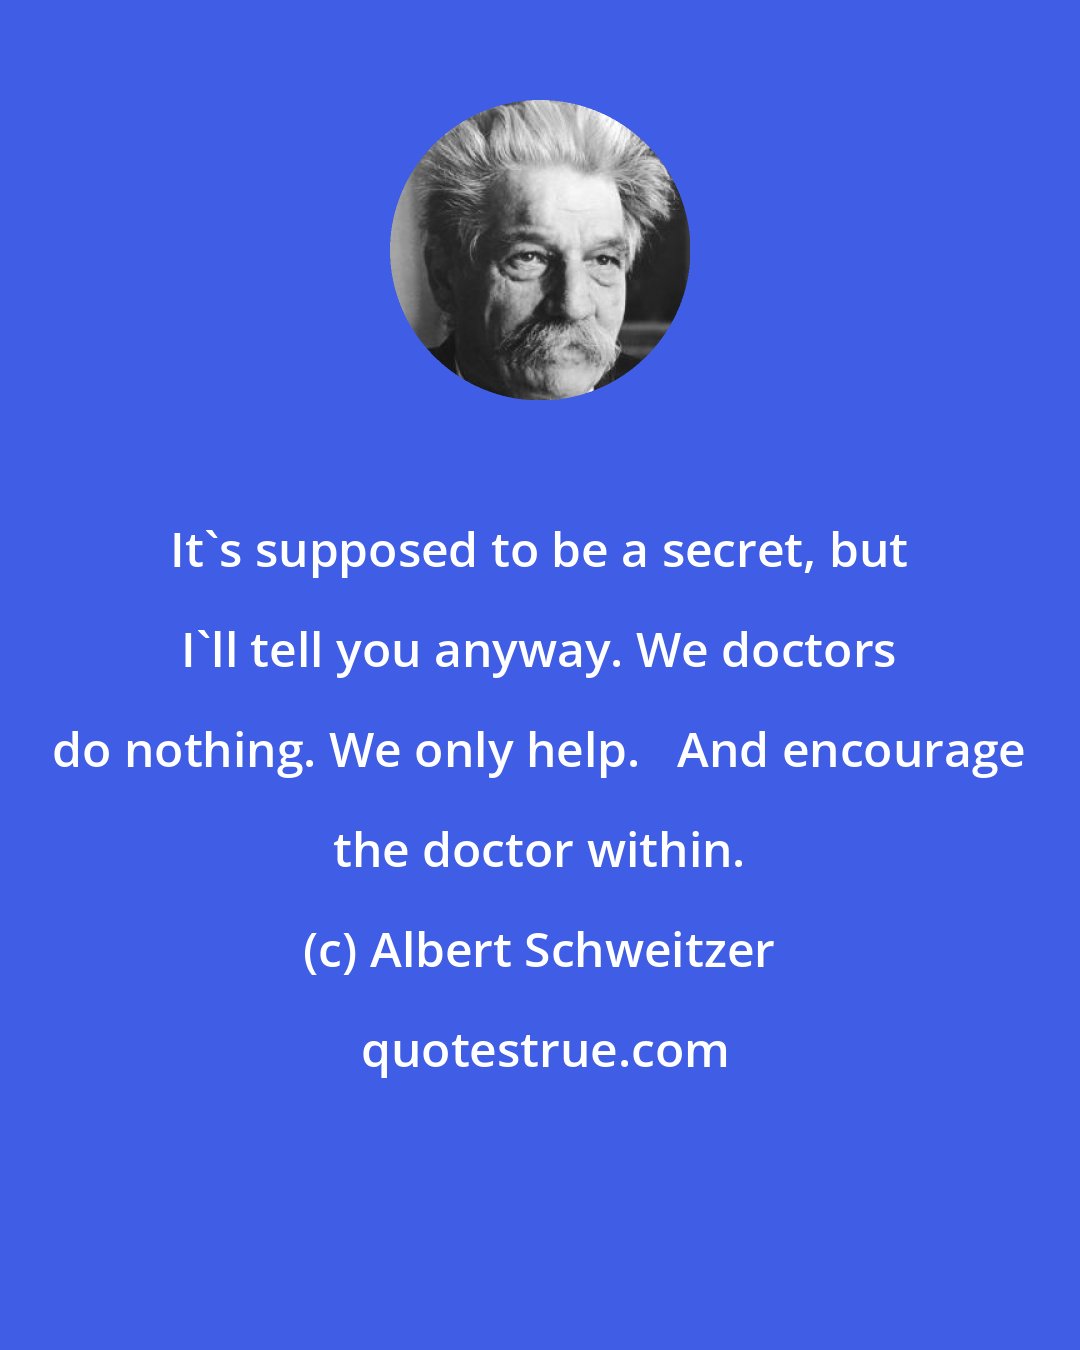 Albert Schweitzer: It's supposed to be a secret, but I'll tell you anyway. We doctors do nothing. We only help.   And encourage the doctor within.